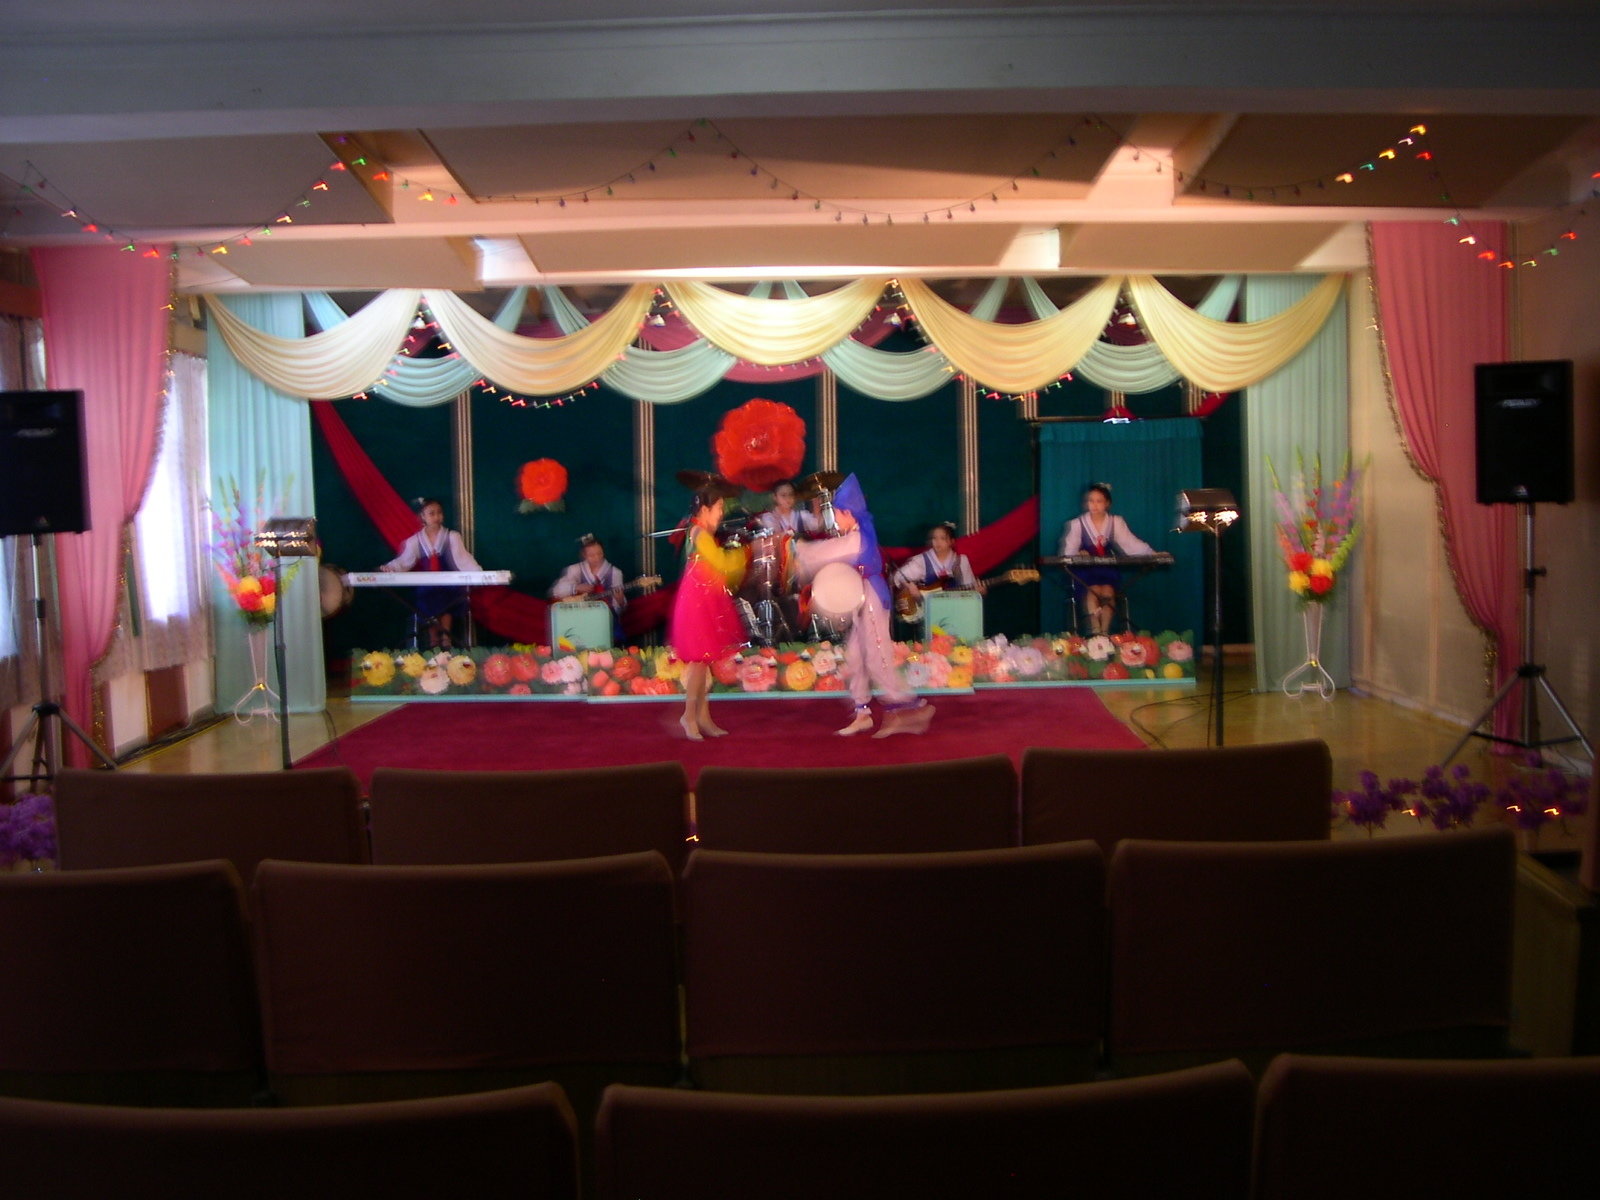 Children performing a dance on a decorated scene